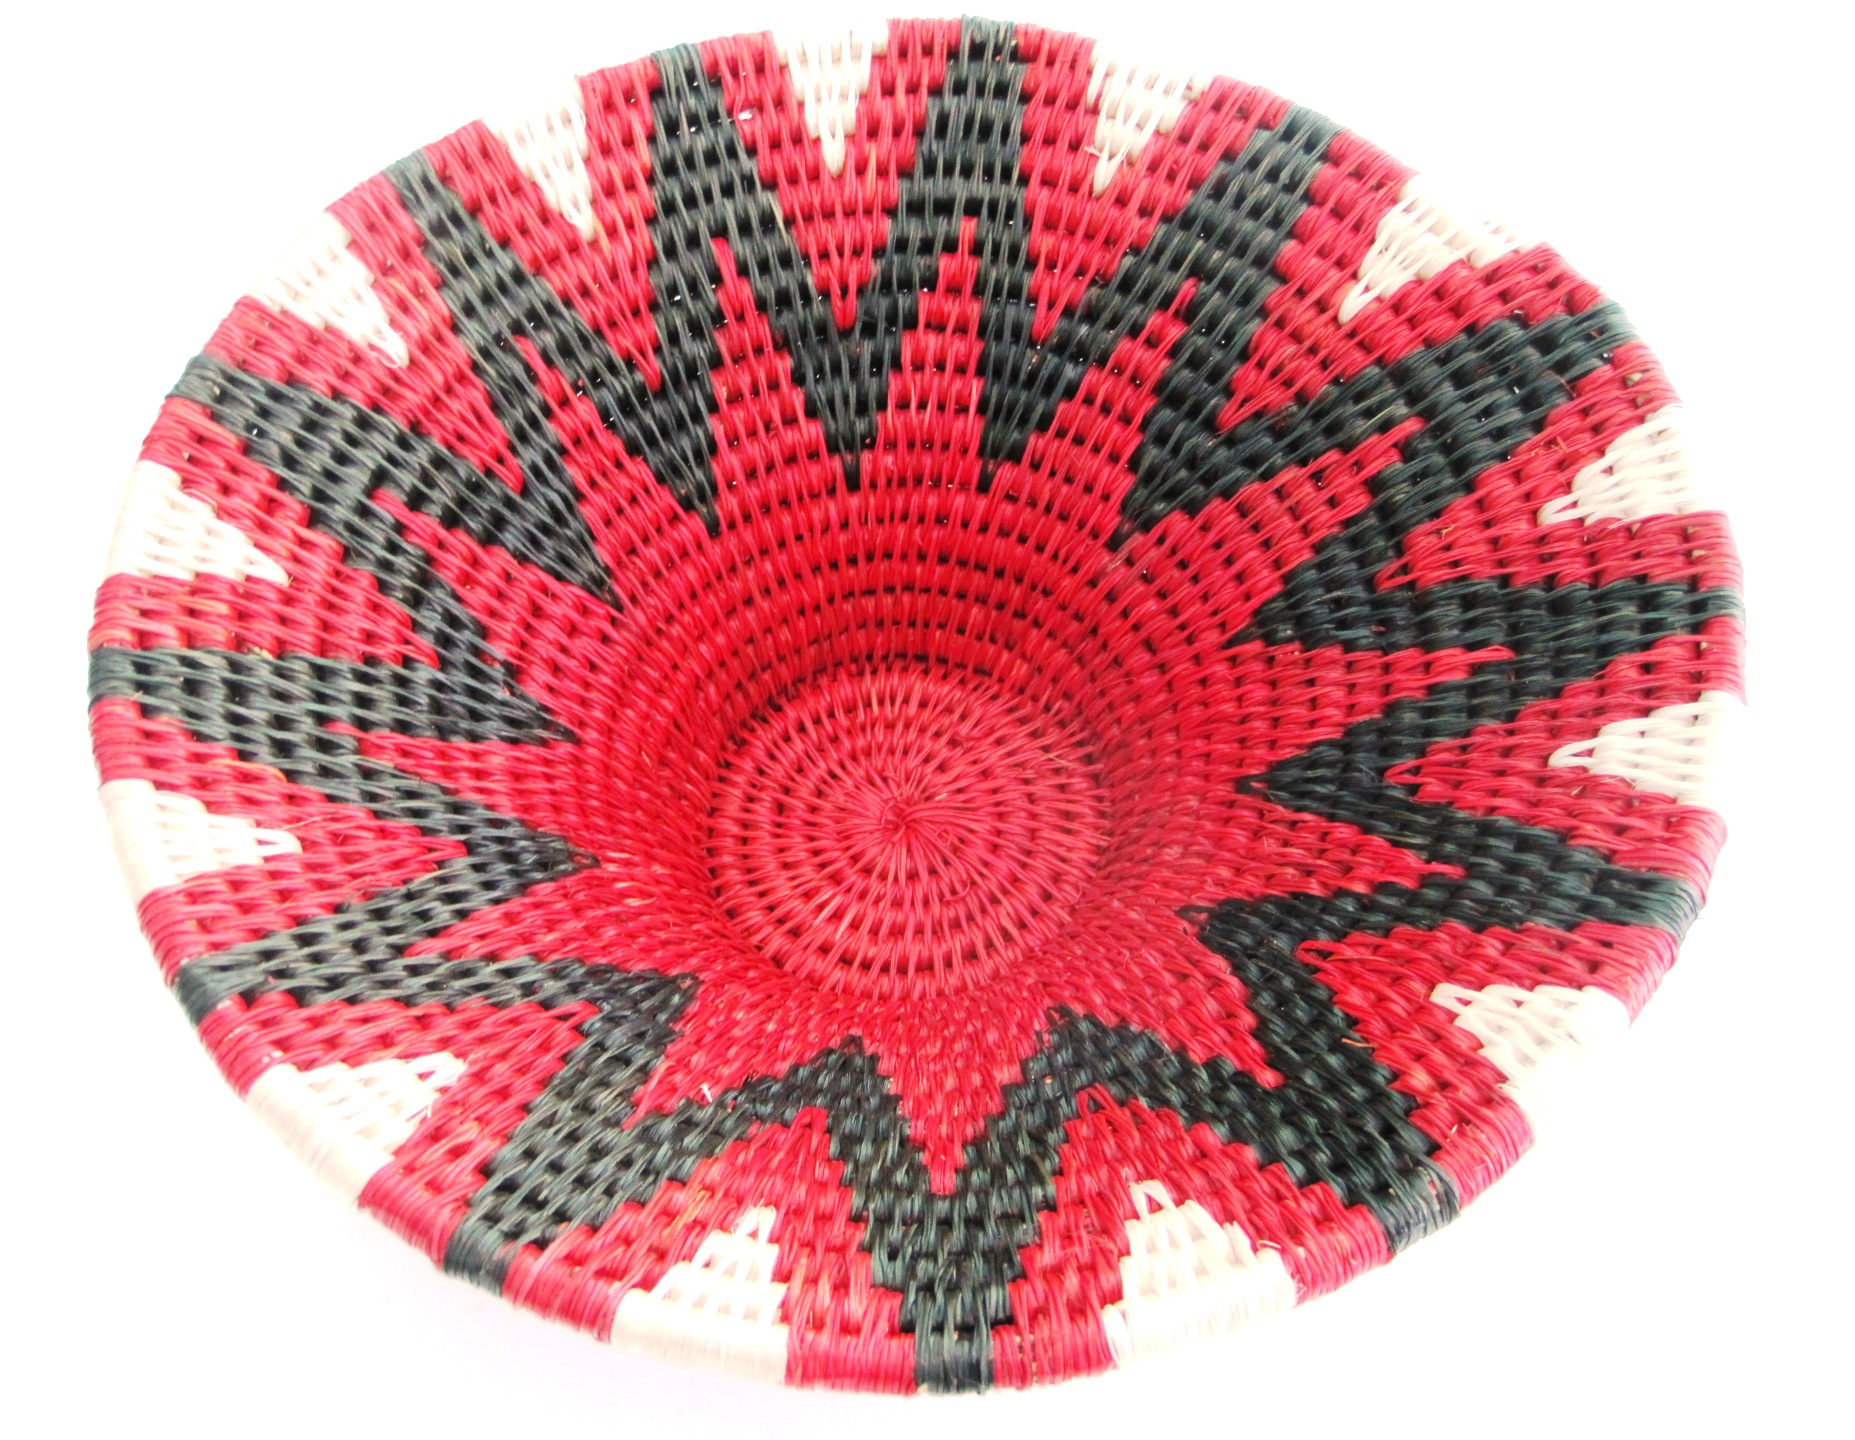 Handwoven Lutindzi Basket from Swaziland - Red Target - M